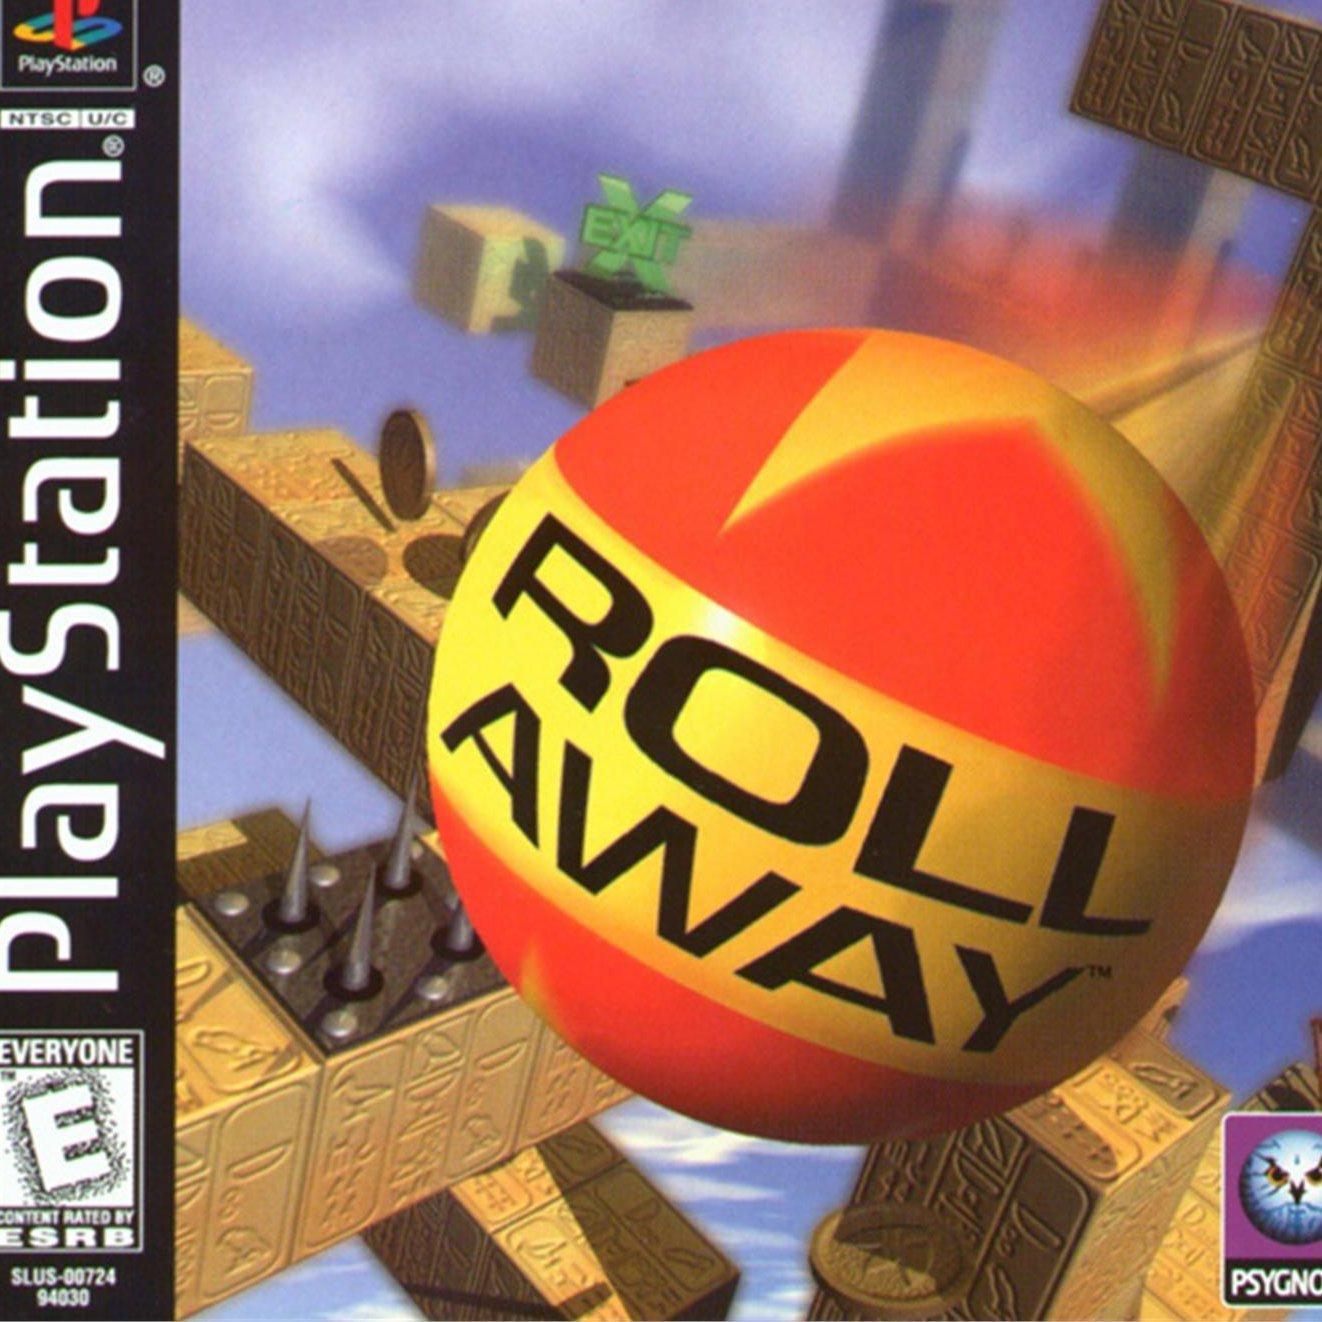 Roll Away for psx 